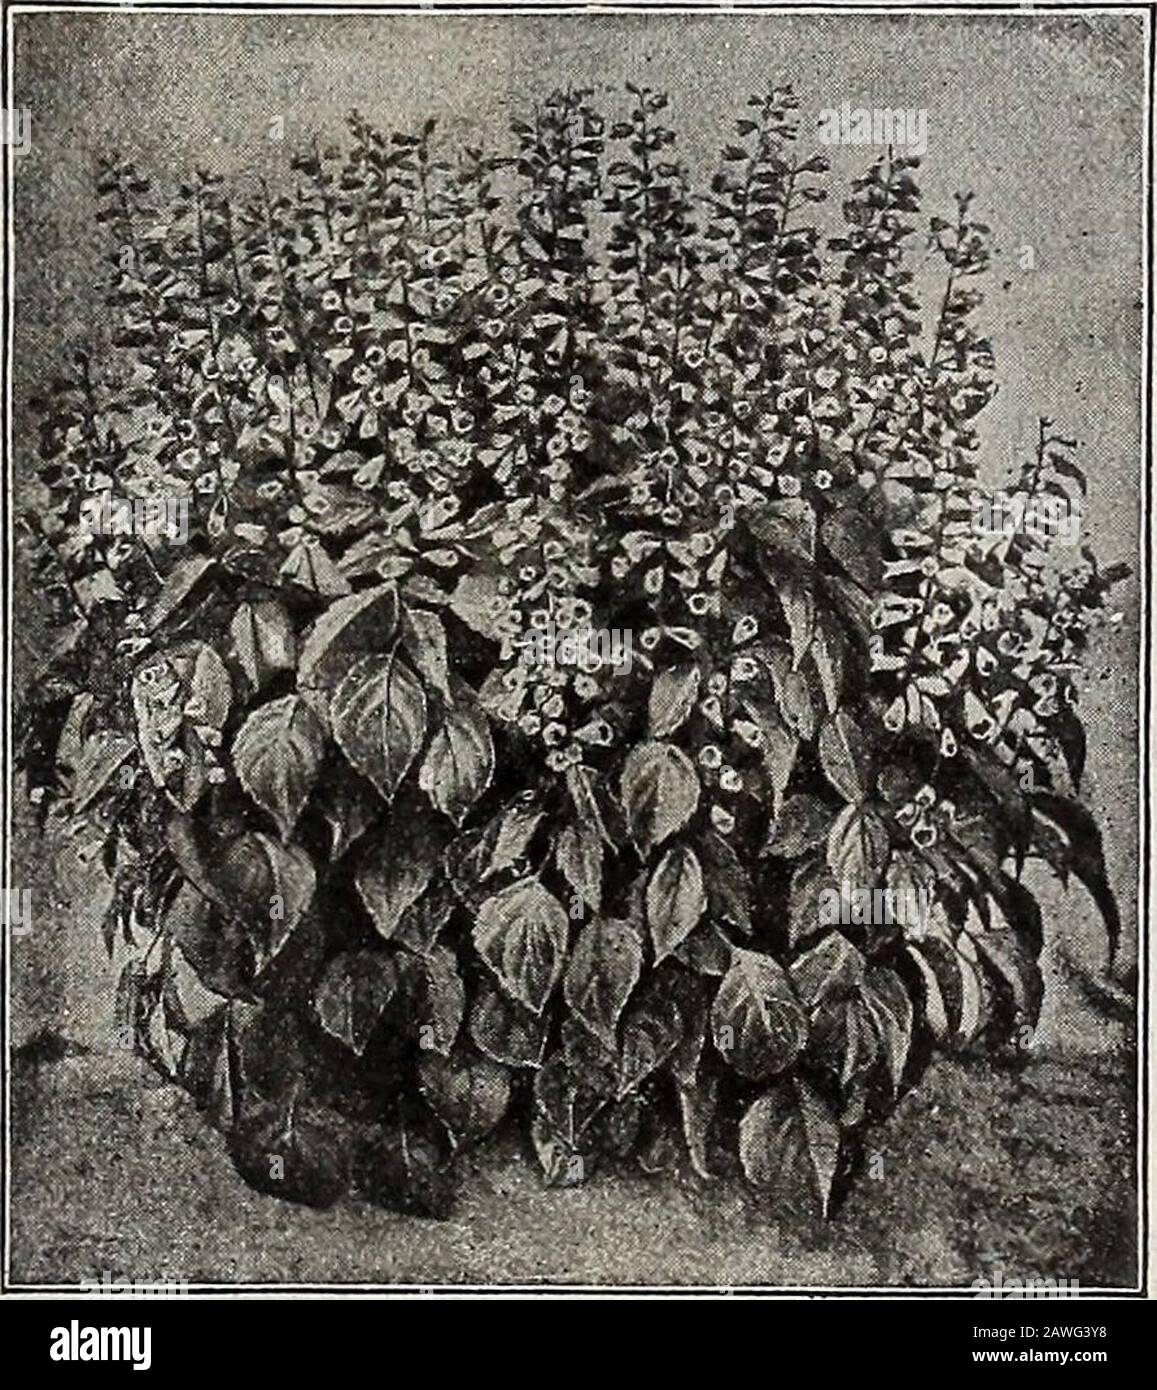 Dreer's 72nd annual edition garden book : 1910 . Primula Obconica Gigantba.. D,TAKF Early-flowerini, Si. aklizt Sack BEUE SAEVIA. (Salvia patens compacta nana.) 3930 Salvia patens, the Blue Sage,has always been admired asthe richest blue of all blueflowers, and in this new varietywe have a decided improve-ment, being dwarfer and morecompact in habit, the flowerslarger and tven more intensein color, and the spikes, whichare held well above the foliage,have usually 3 to 5 flowersopen at one time. Seed sownin March produce plants thatwill bloom early in July, con-tinuing through the summerand aut Stock Photo